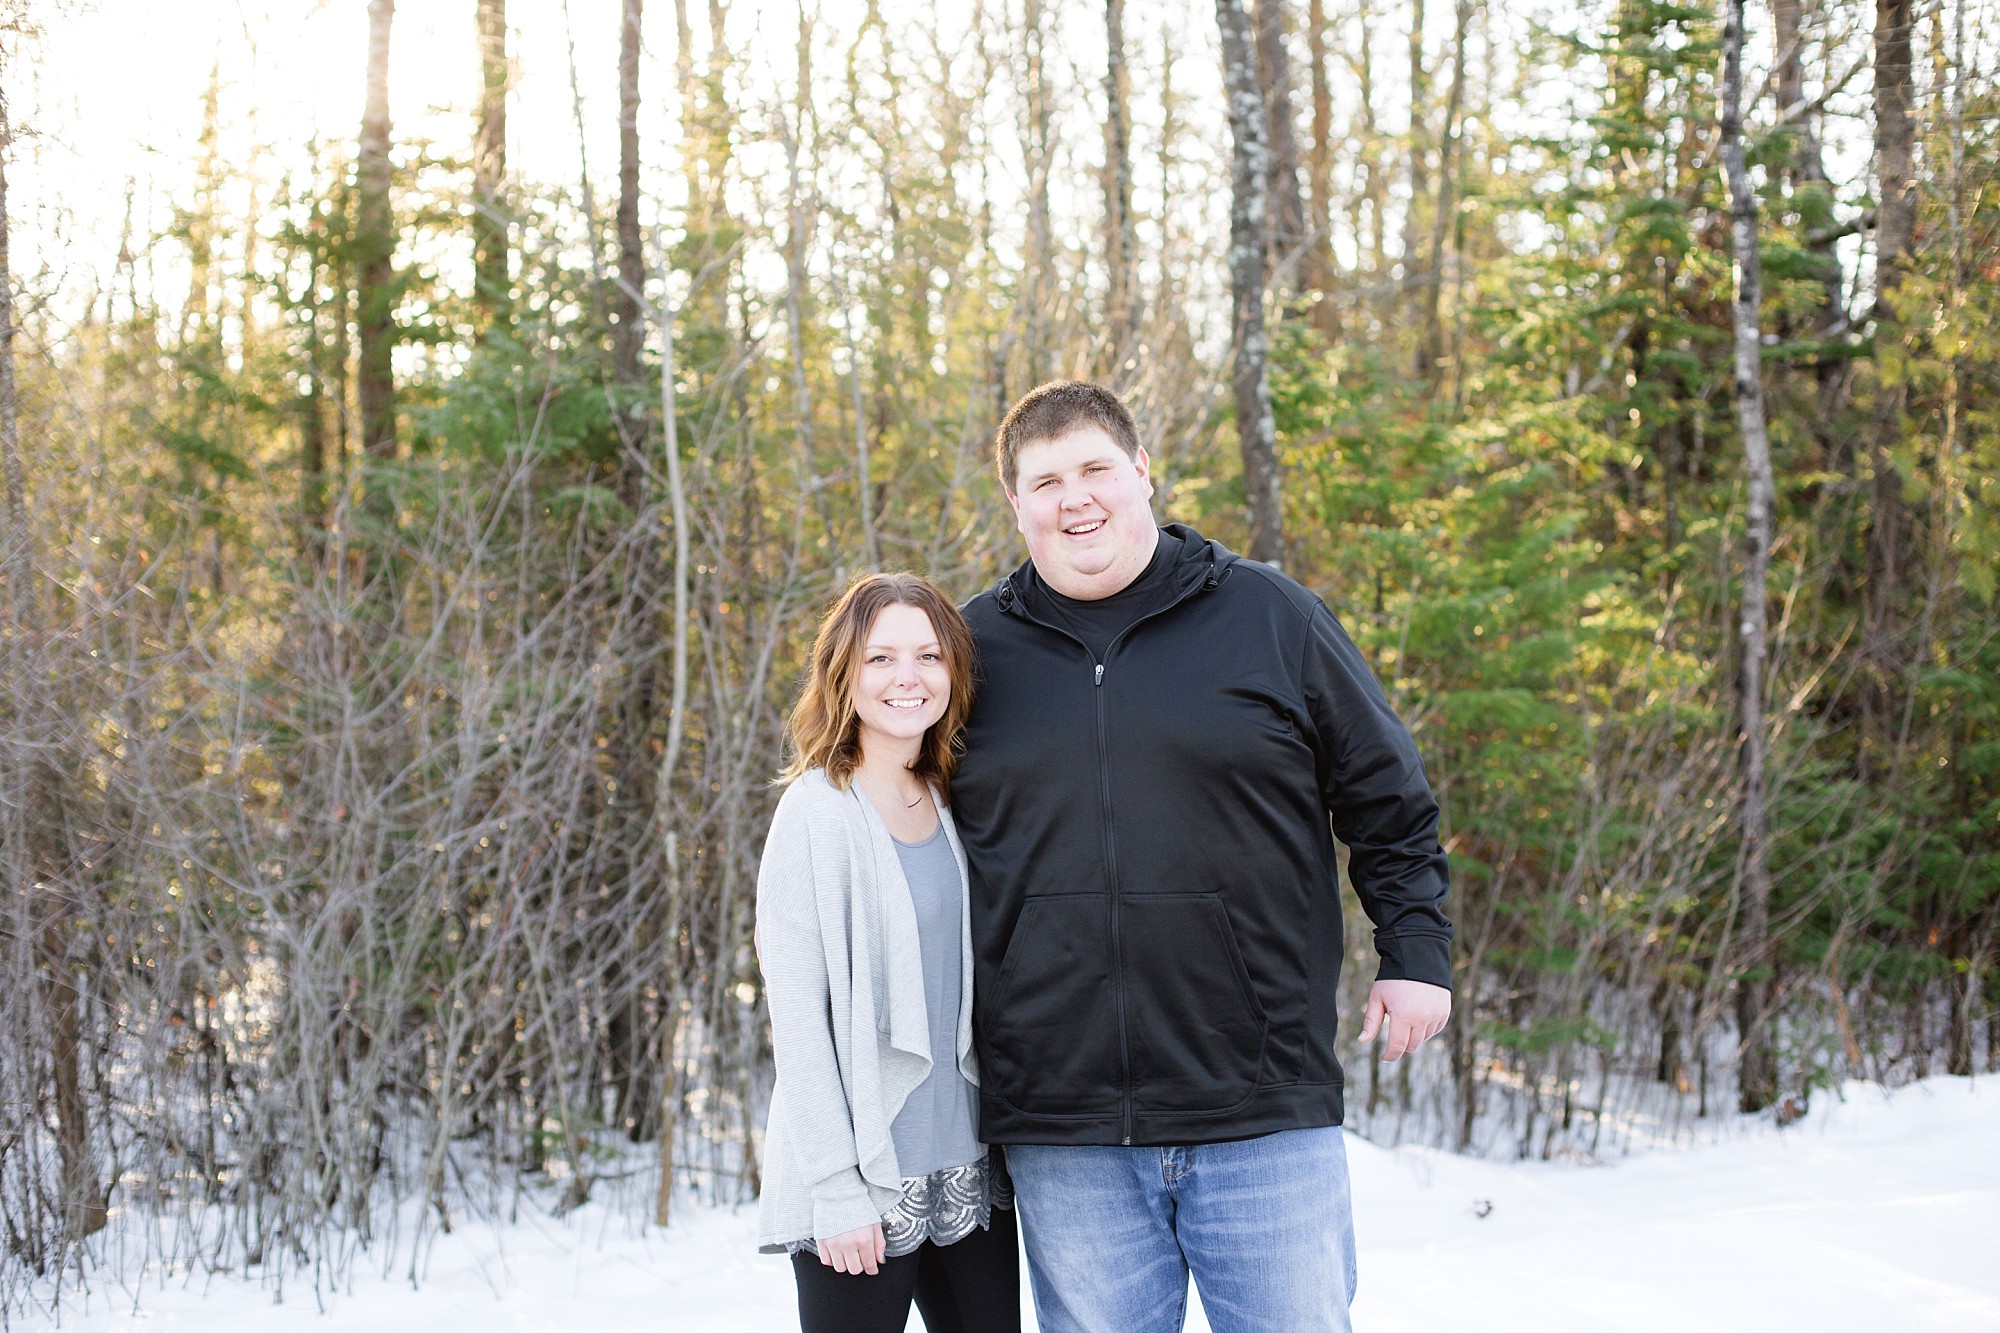 A winter engagement session in Northern Michigan by Breanne Rochelle Photography.